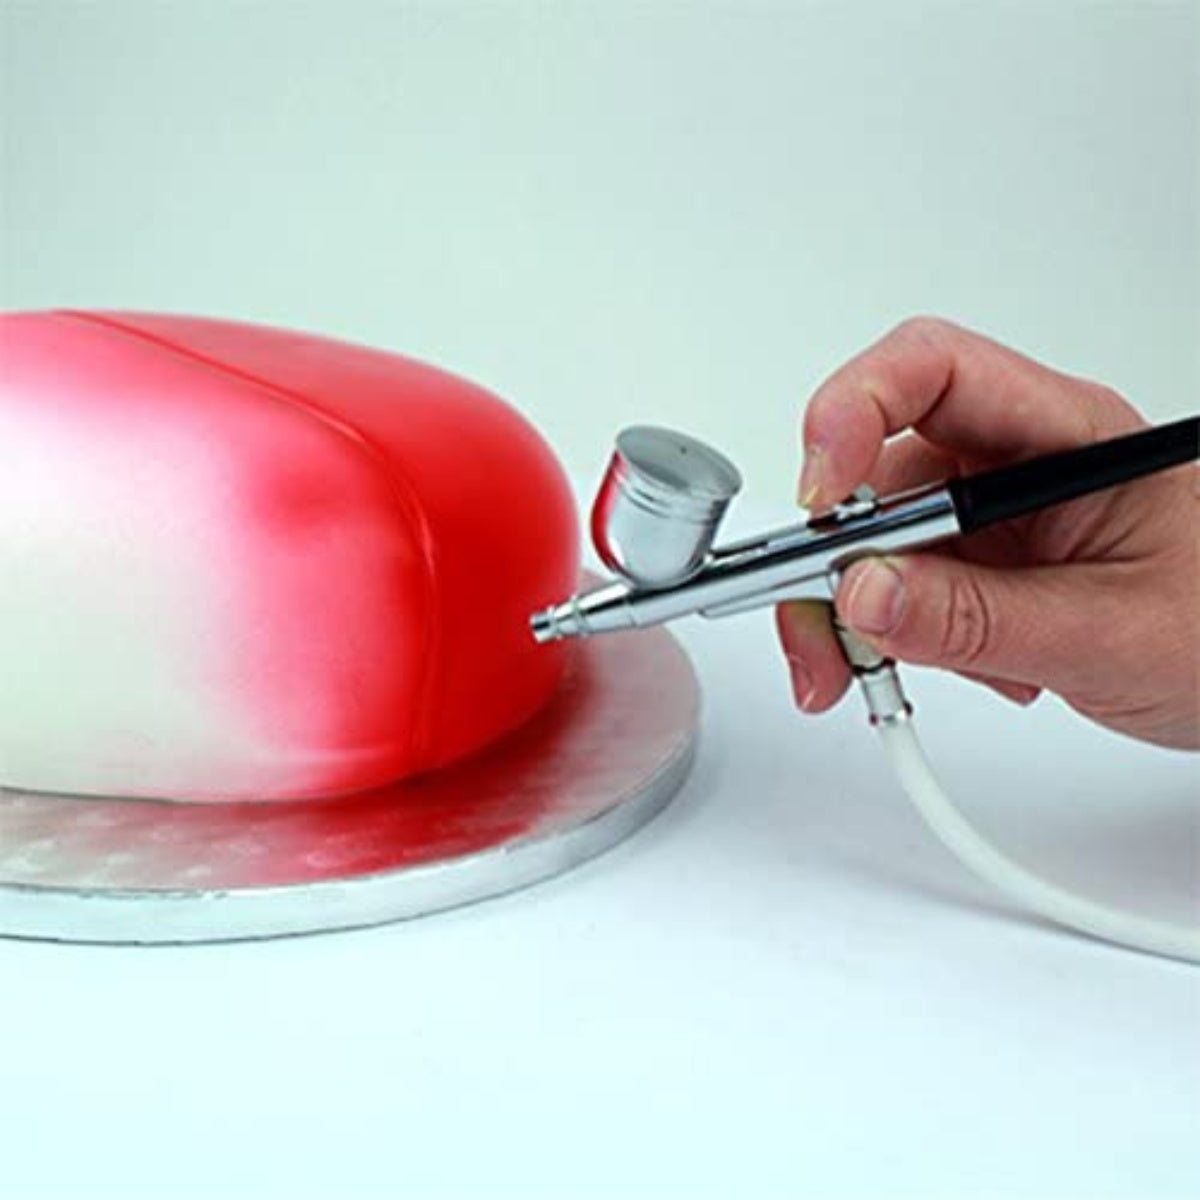 PME Icing Tip Cleaning Brush - Large and Small